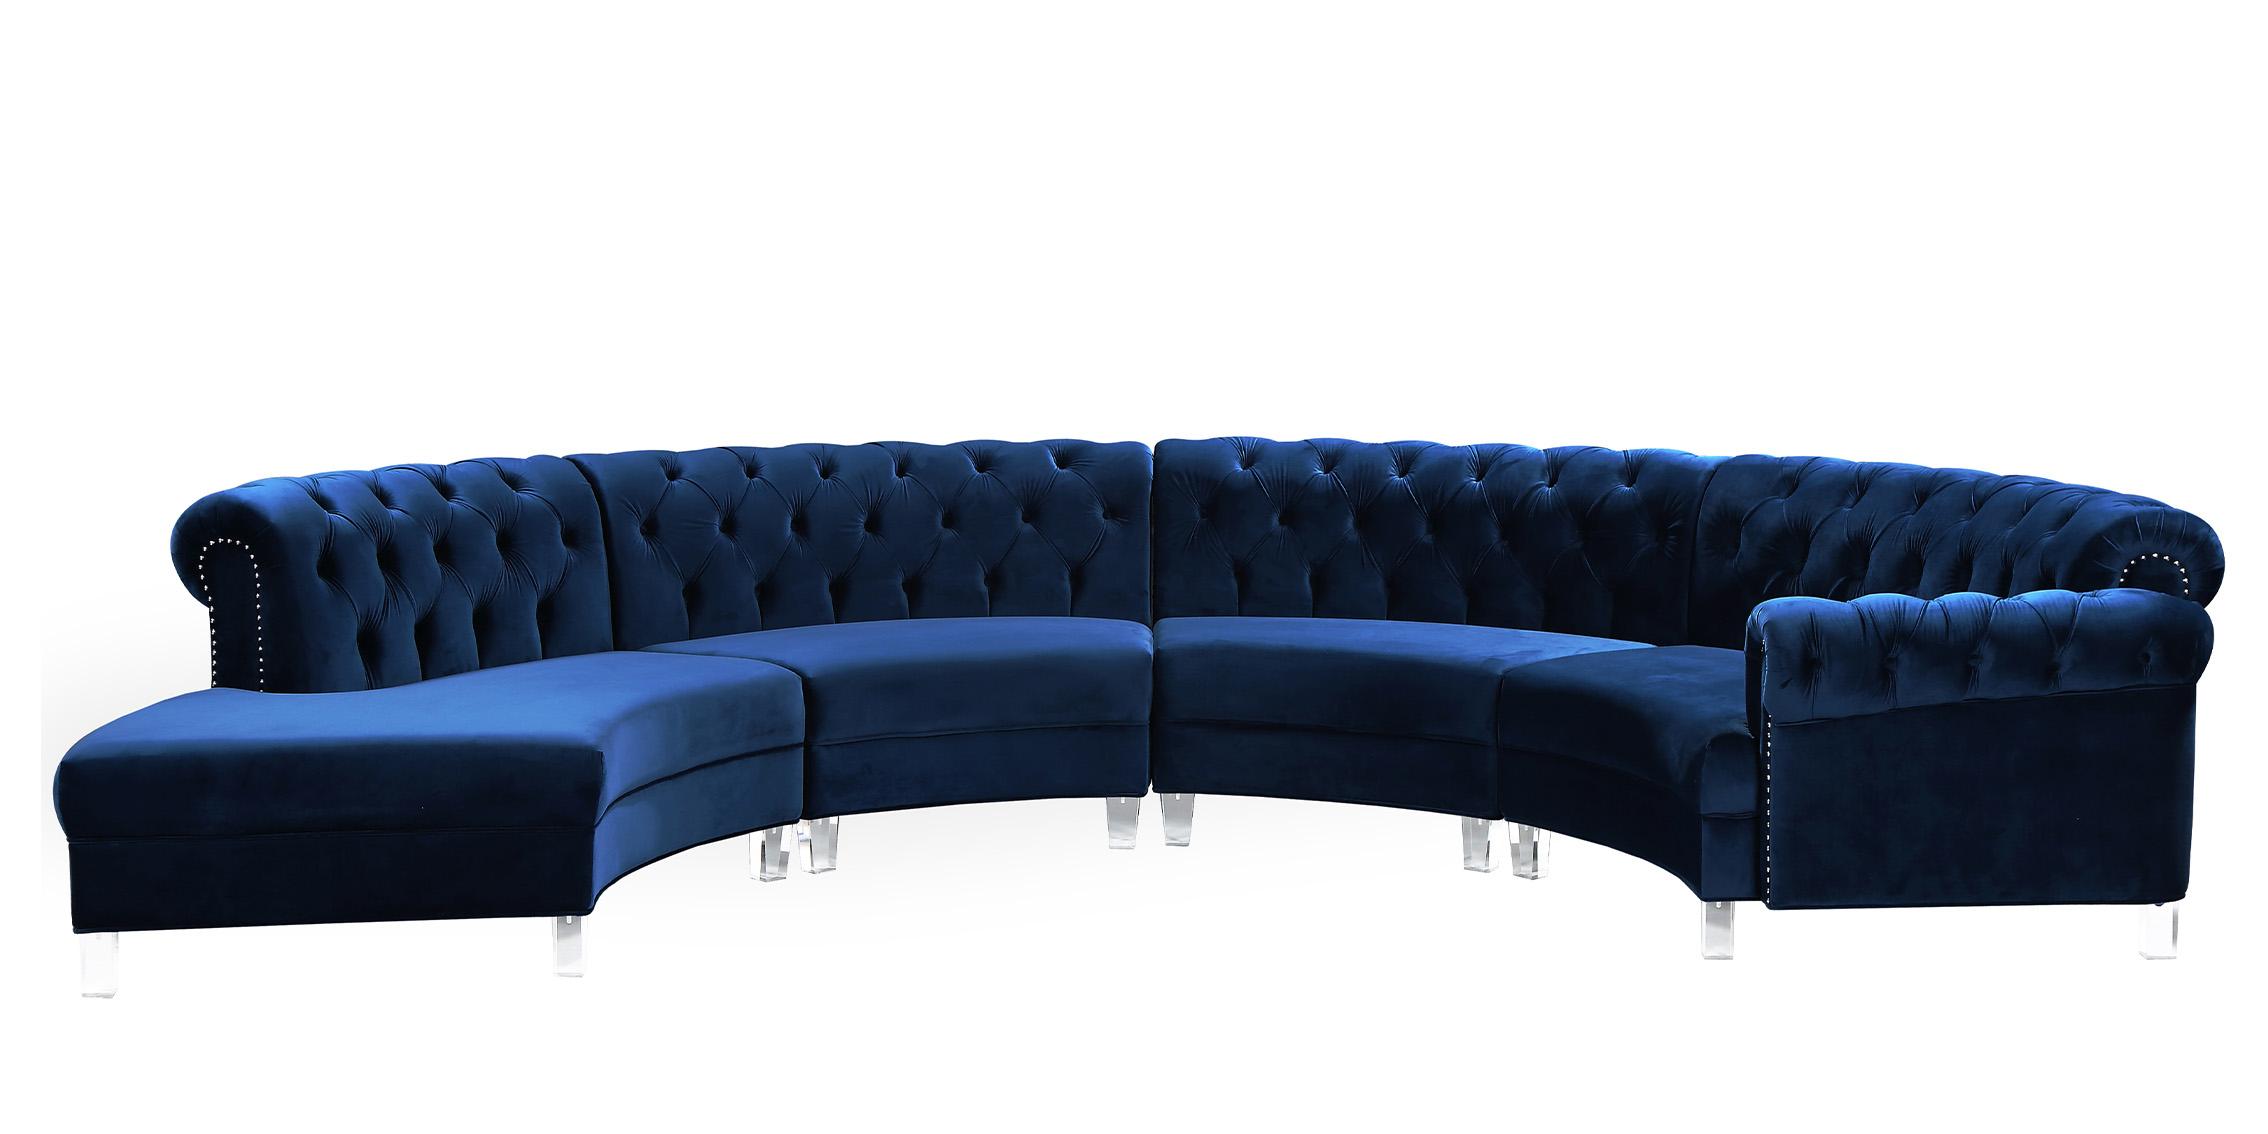 

    
Meridian Furniture ANABELLA-697Navy-4 Sectional Sofa Blue 697Navy-Sec-4PC
